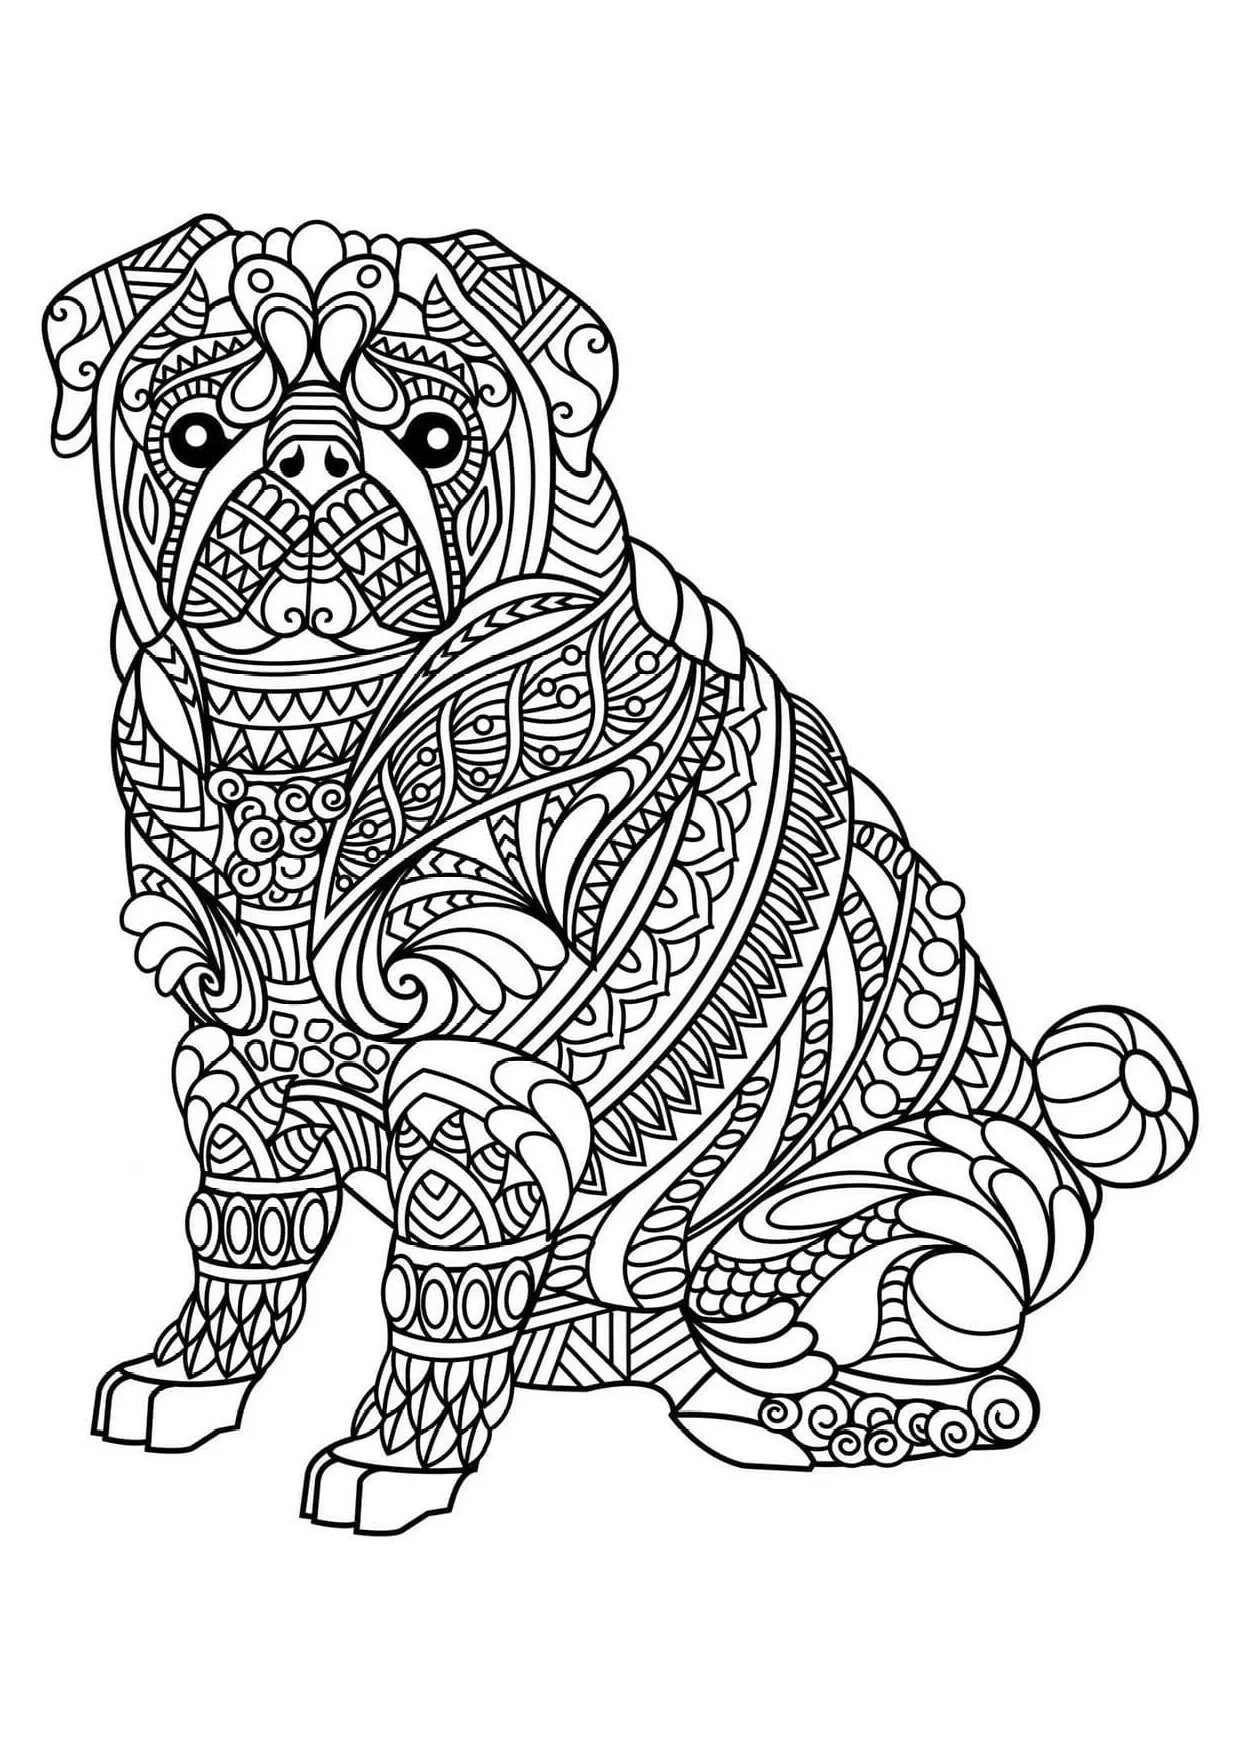 Adorable dog with patterns coloring book